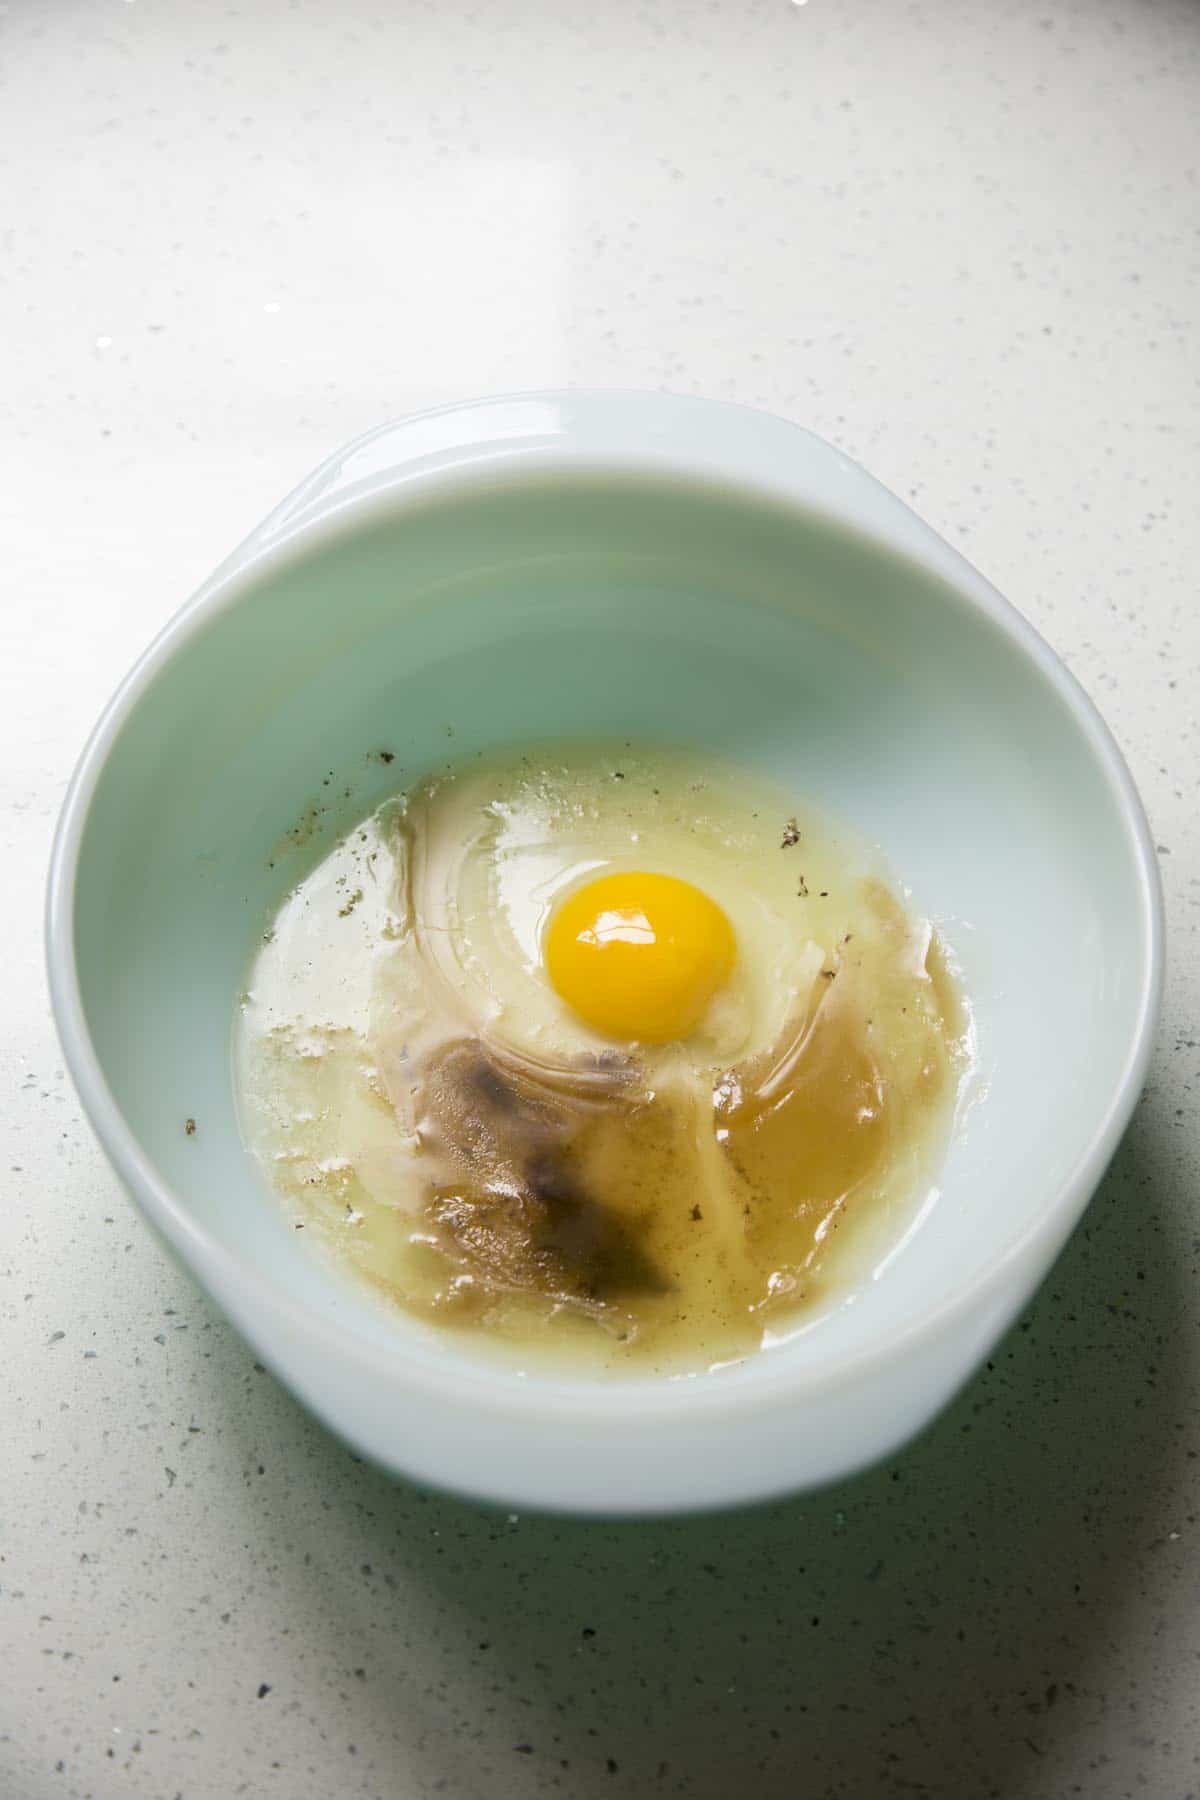 Bacon fat, egg and stock in a mixing bowl.